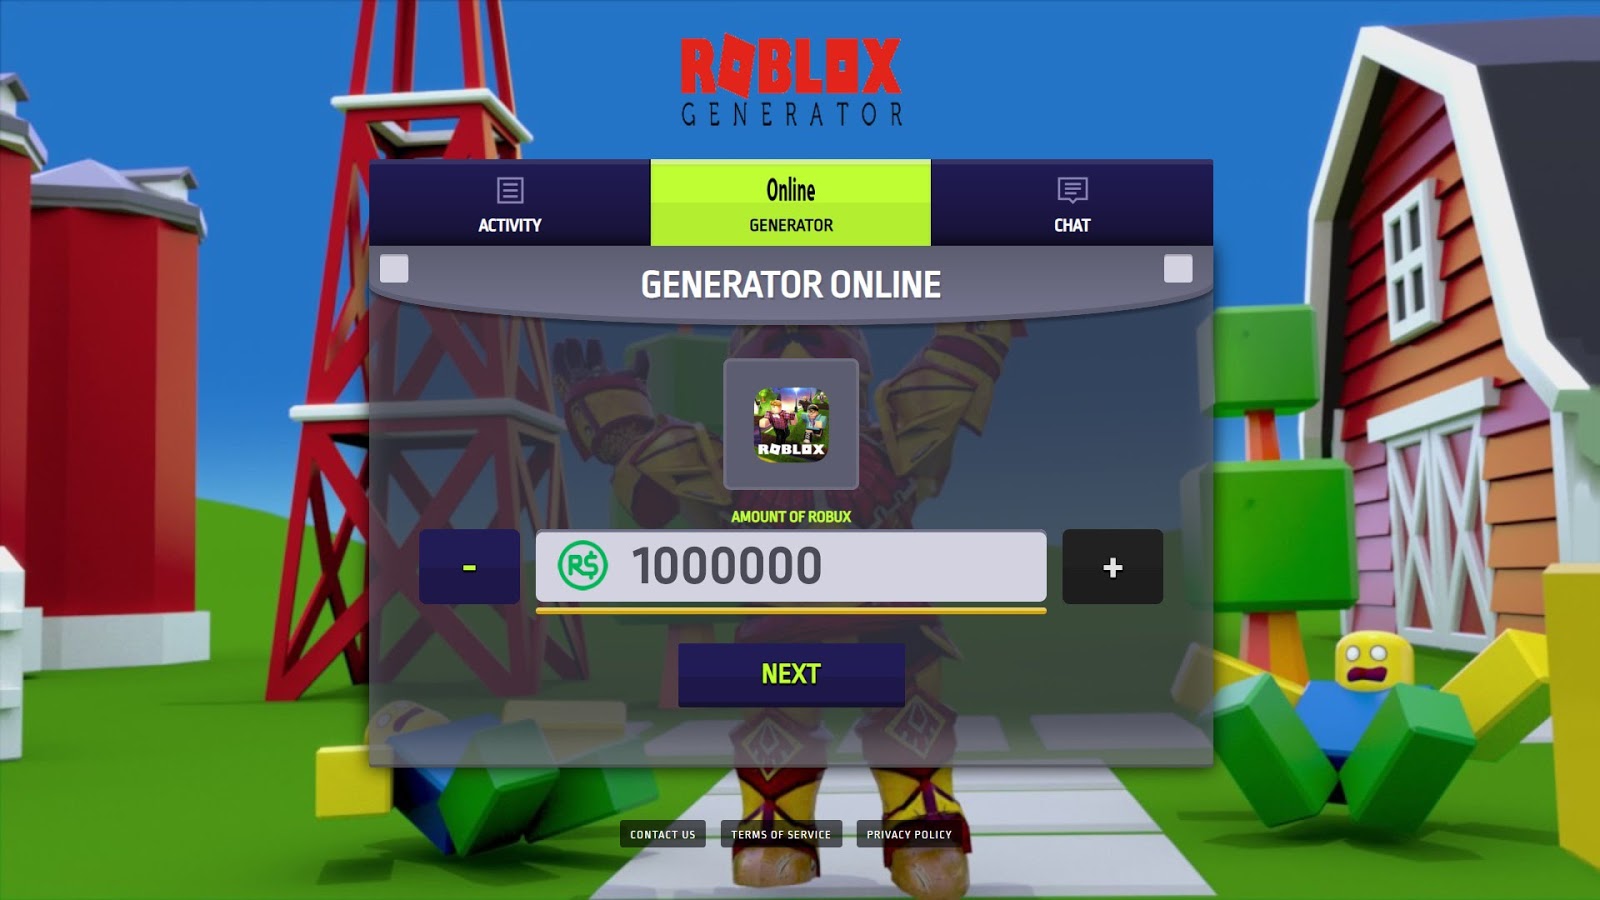 Roblox Aimbot Cheat Engine Robux Offers - roblox infinity gauntlet robux cheat engine 2019